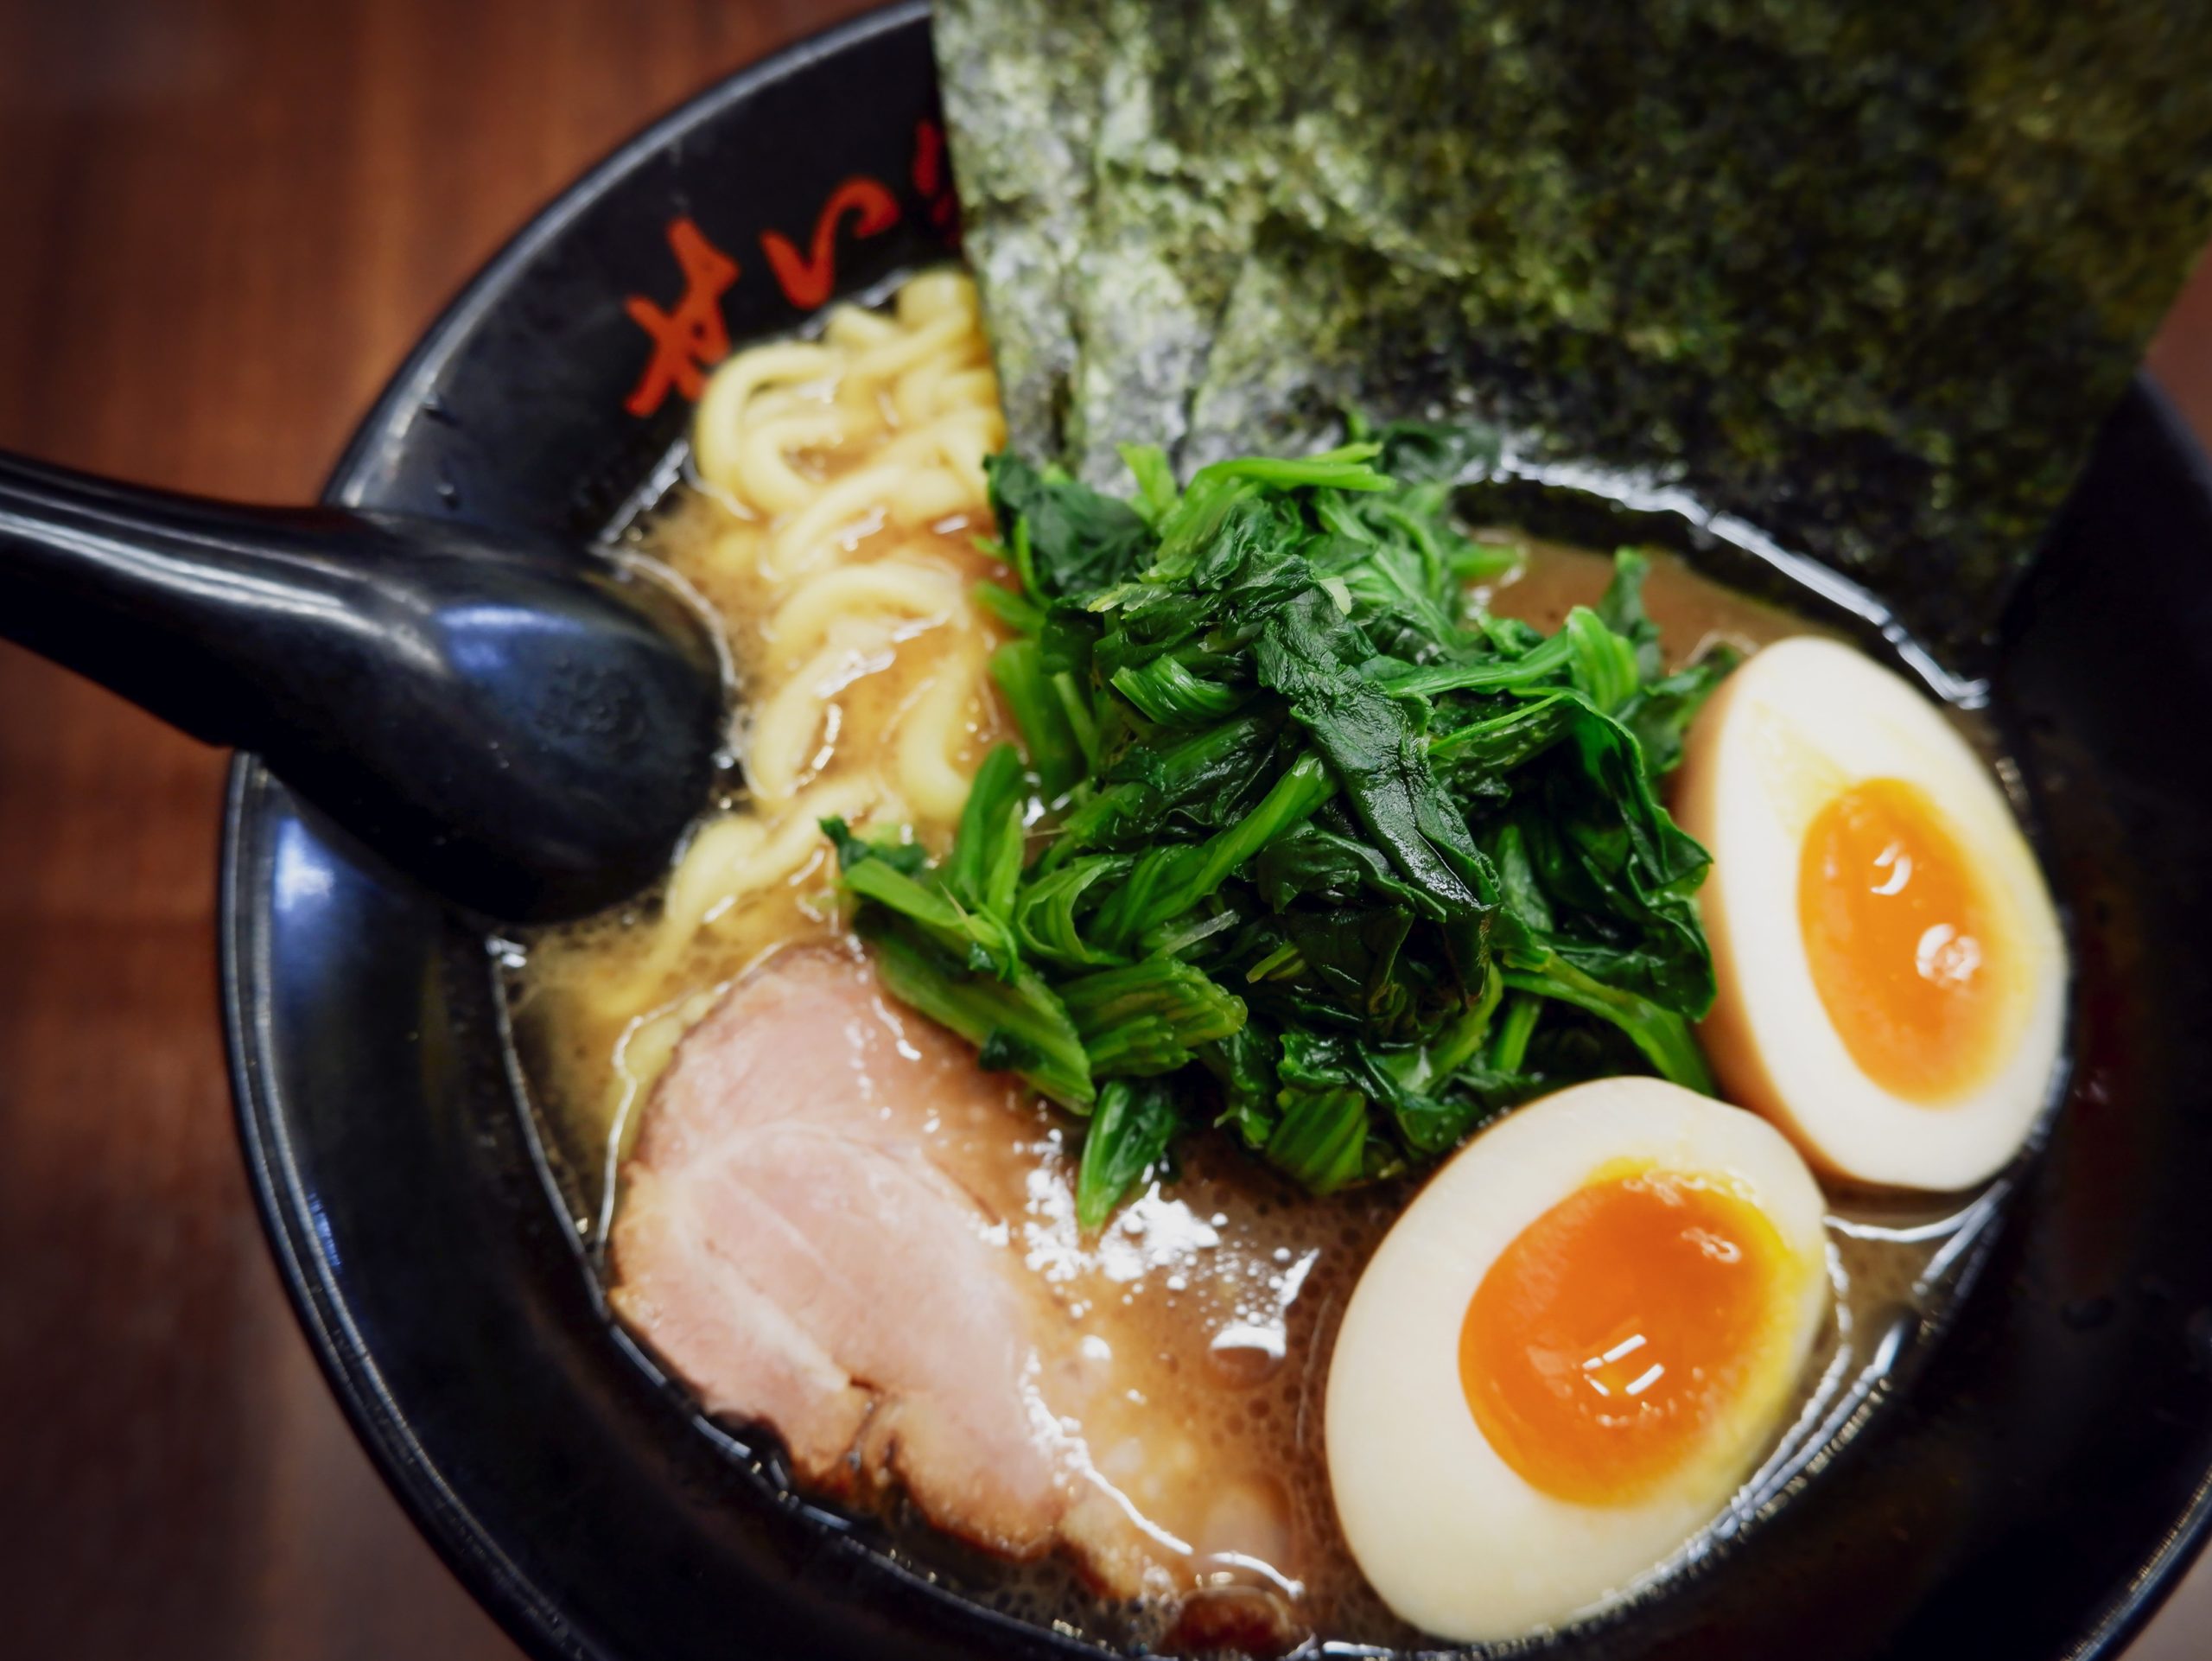 A bowl of ramen with noodles, meat, nori, greens, and a soft boiled egg.